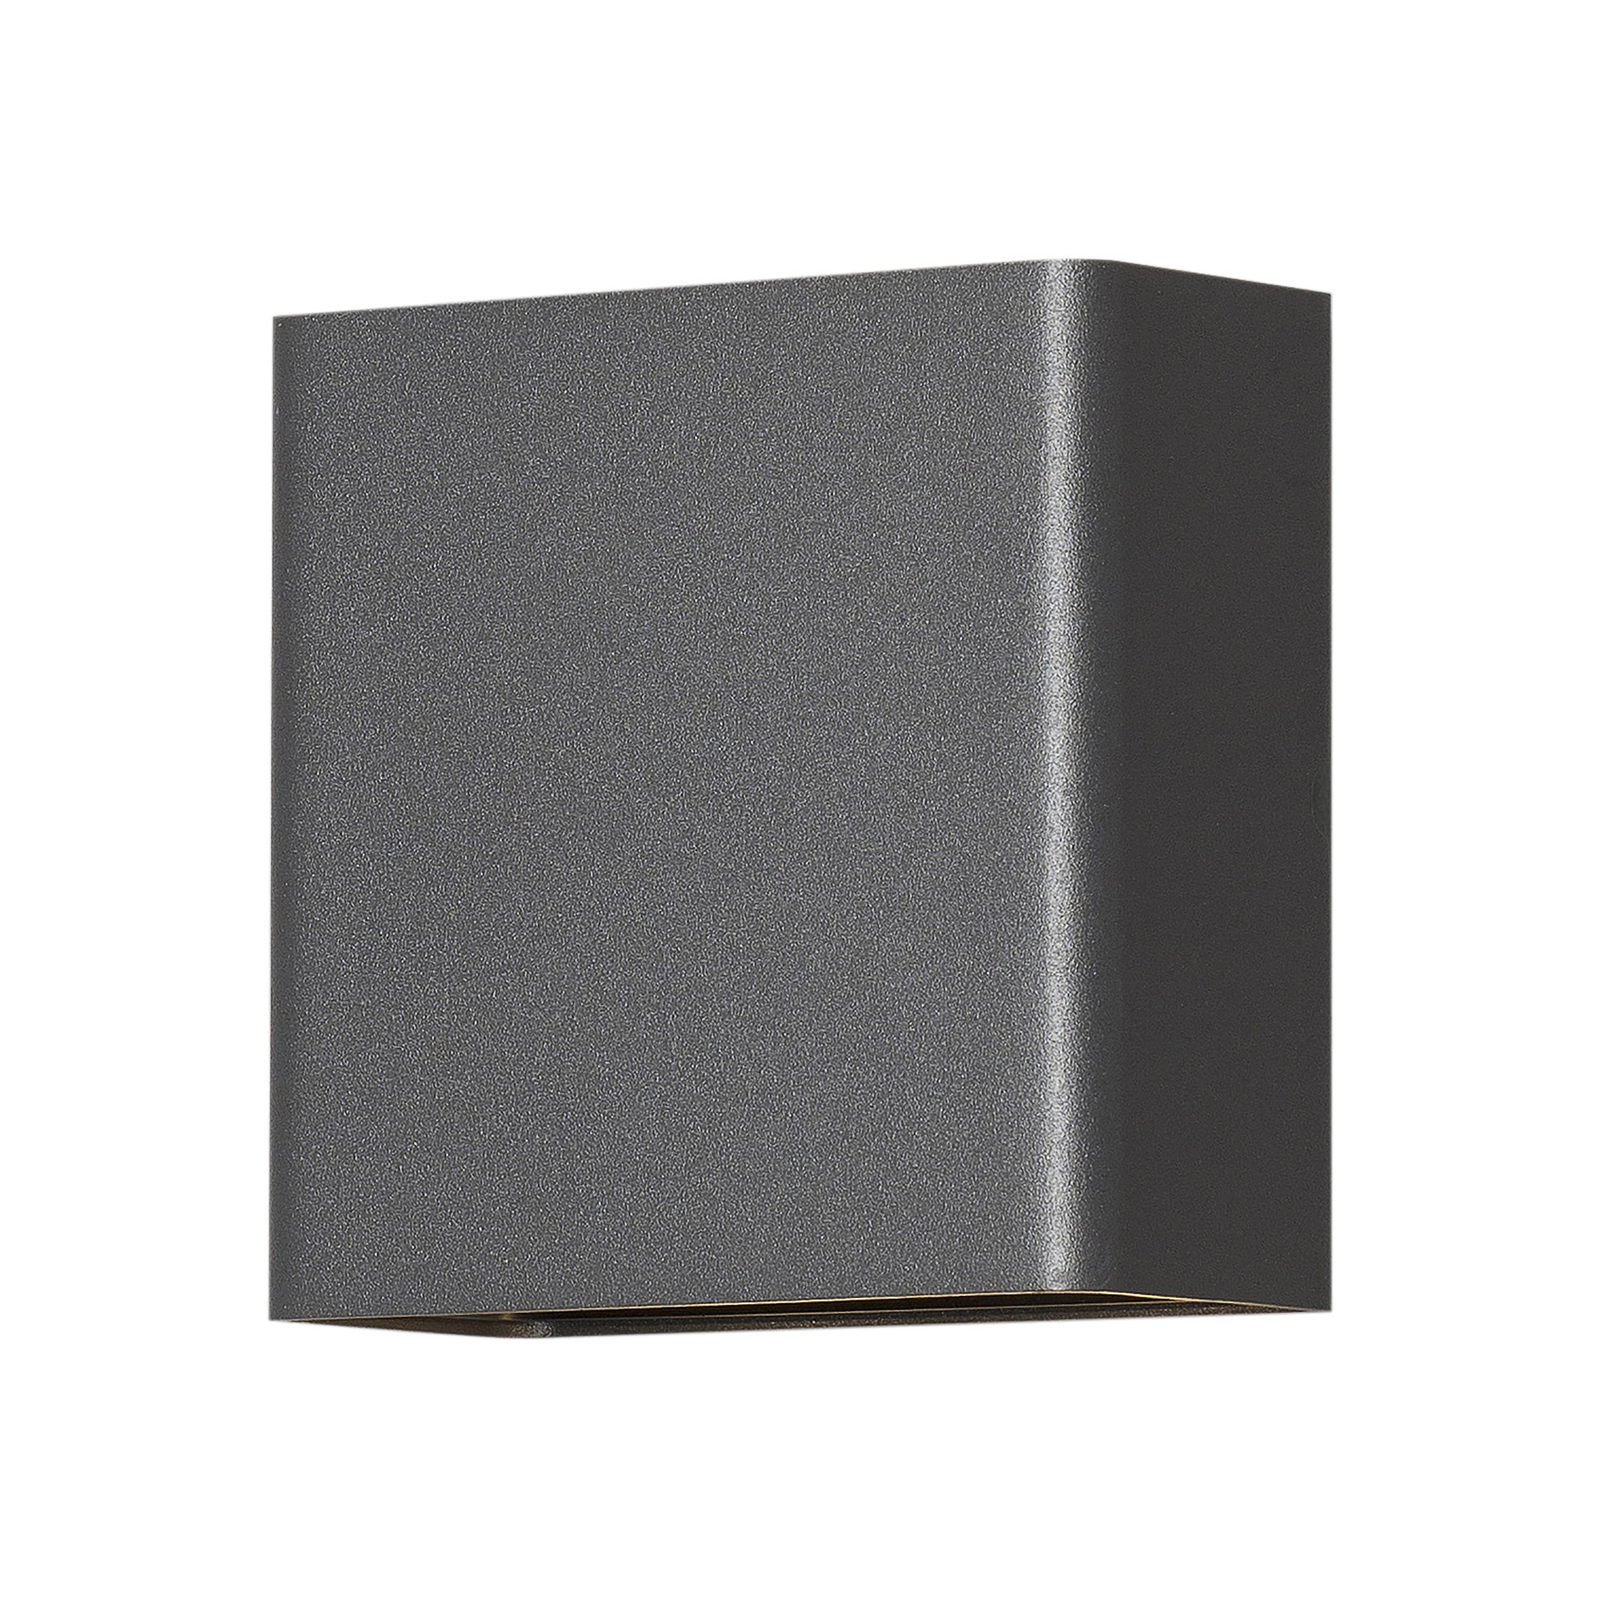 Chieri LED outdoor wall light, 4-bulb, anthracite